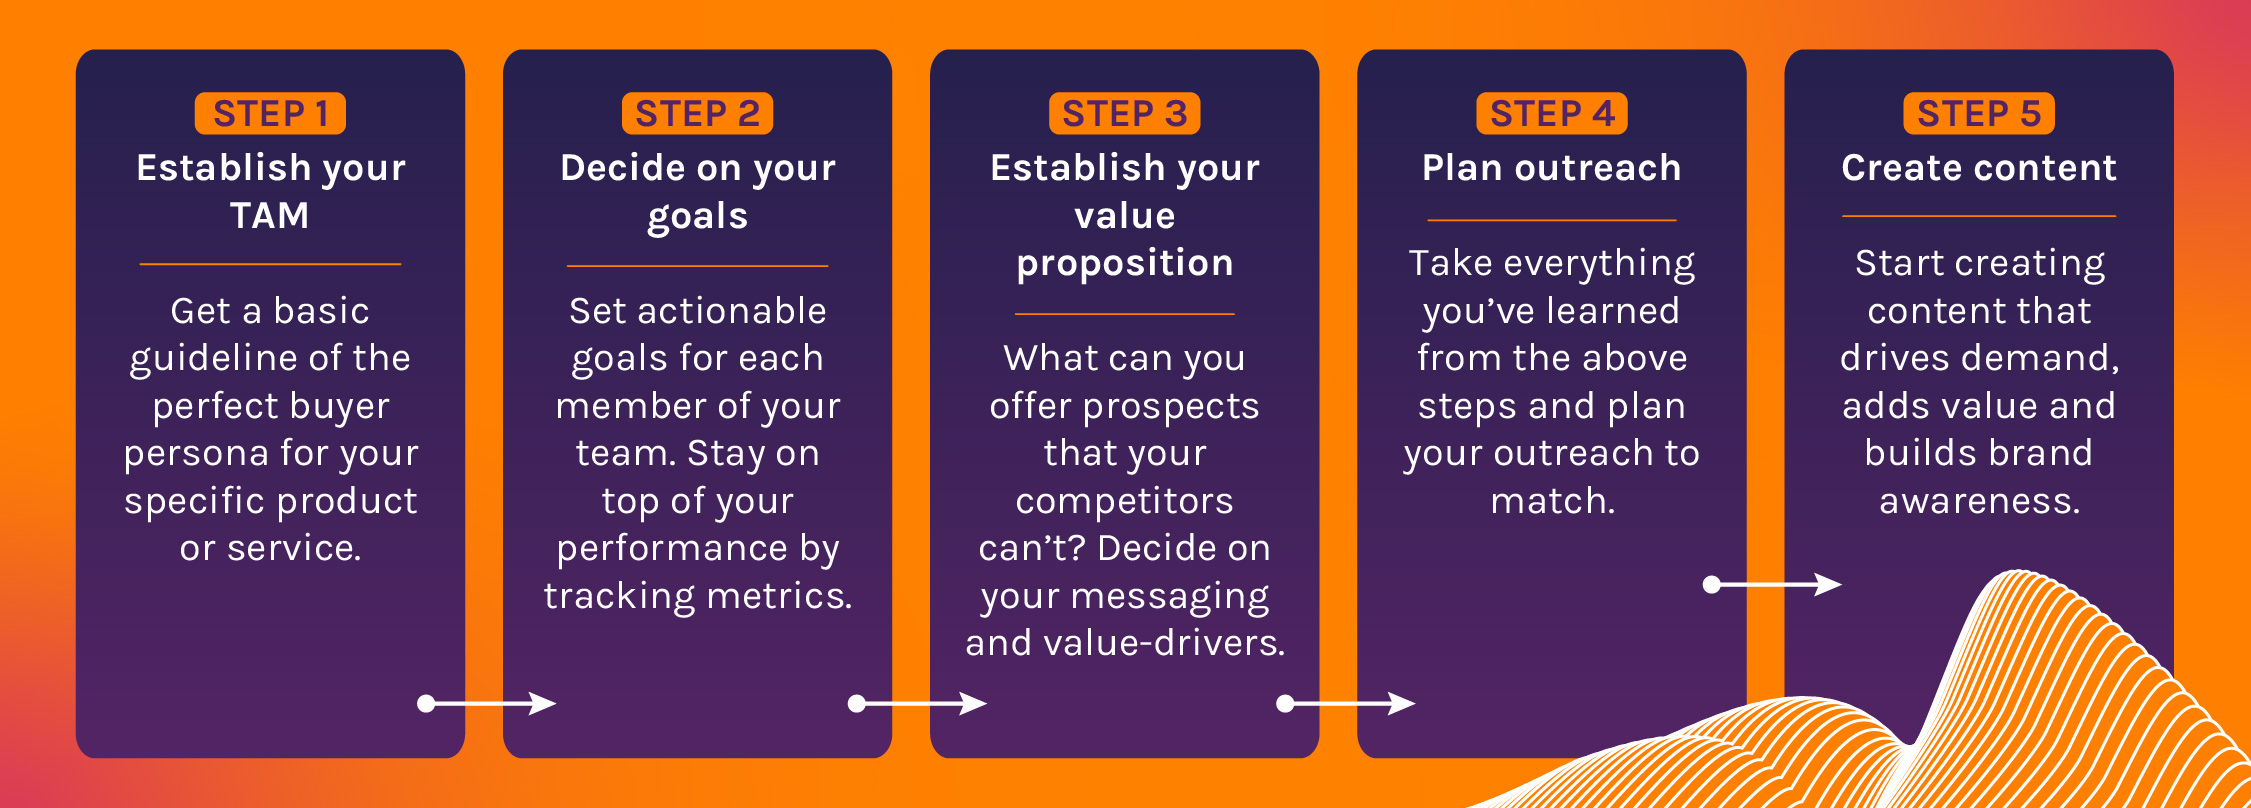 Steps to creating a successful B2B marketing strategy from establishing your TAM to creating content.